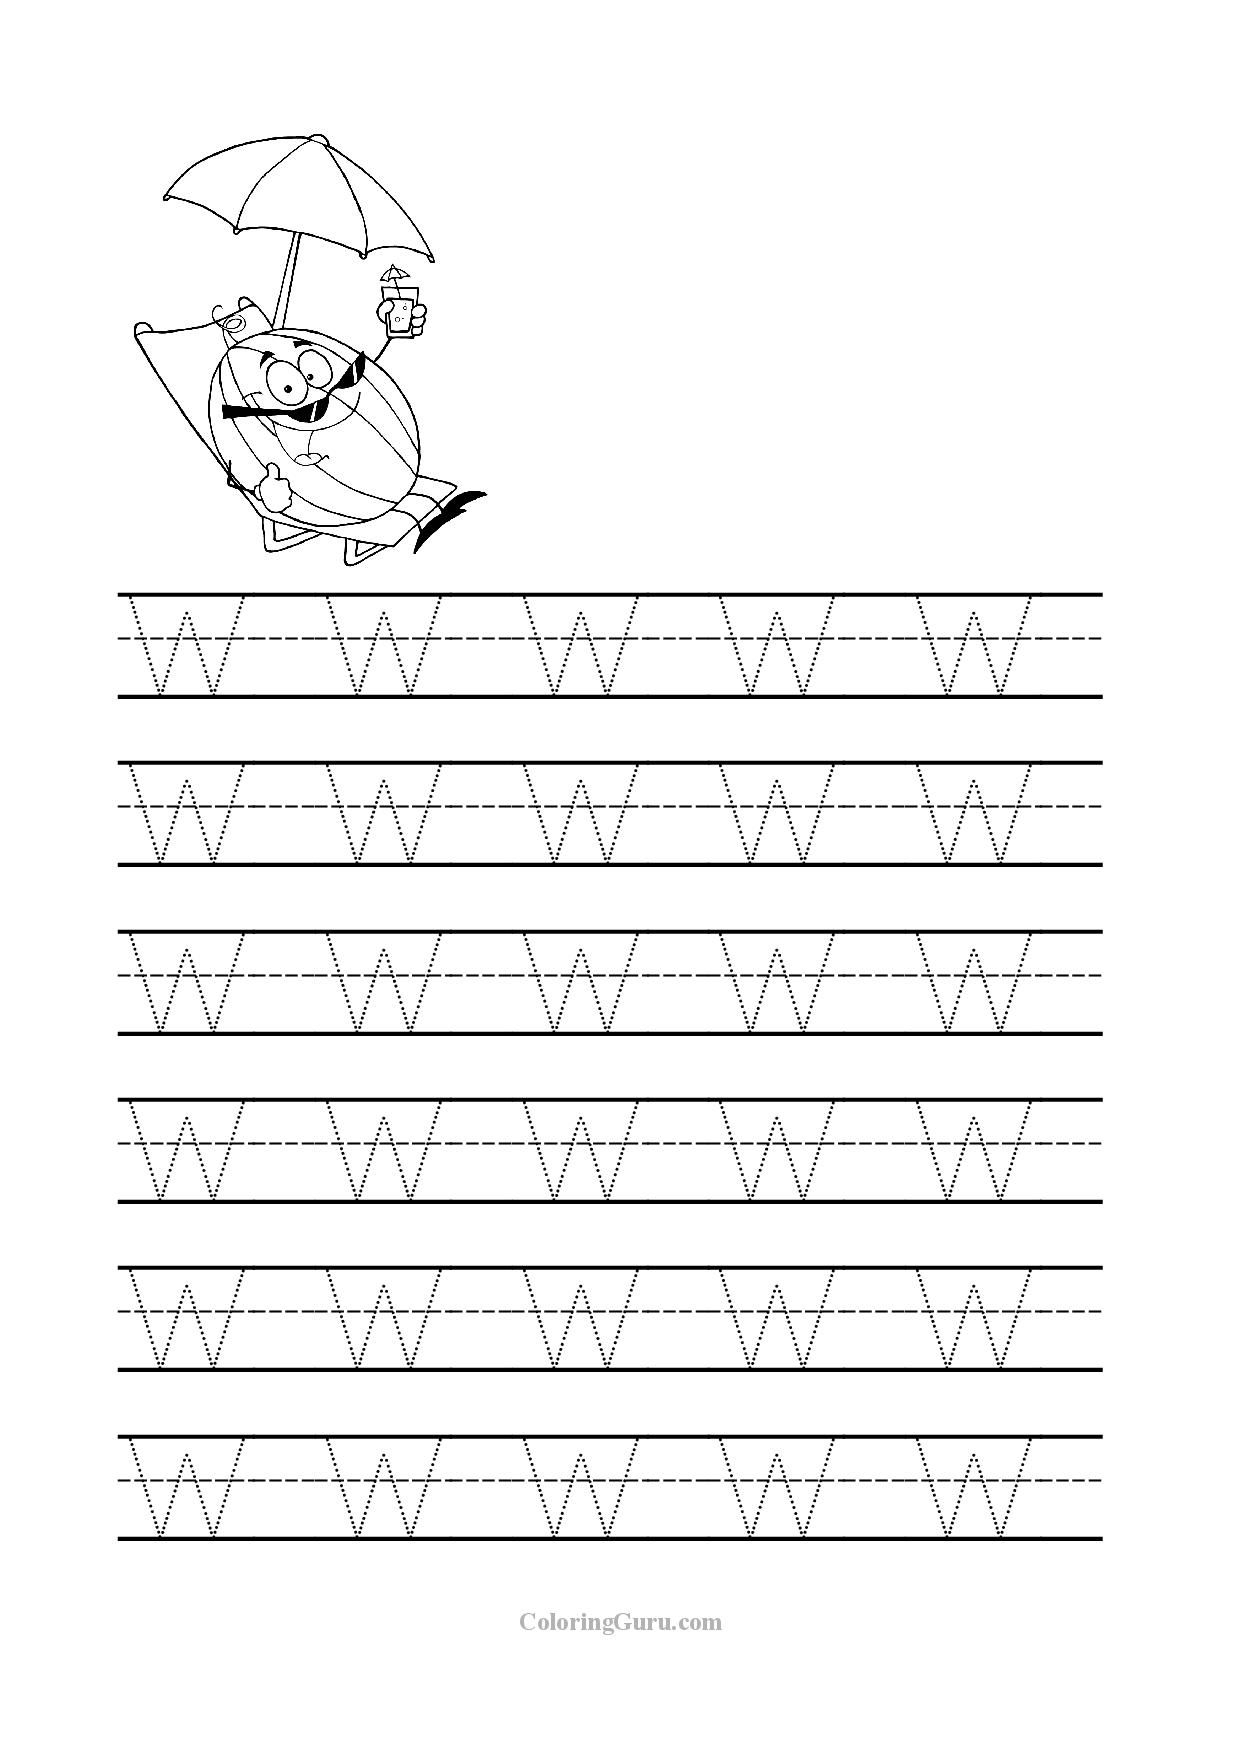 Free Printable Tracing Letter W Worksheets For Preschool in Letter W Worksheets For Preschool